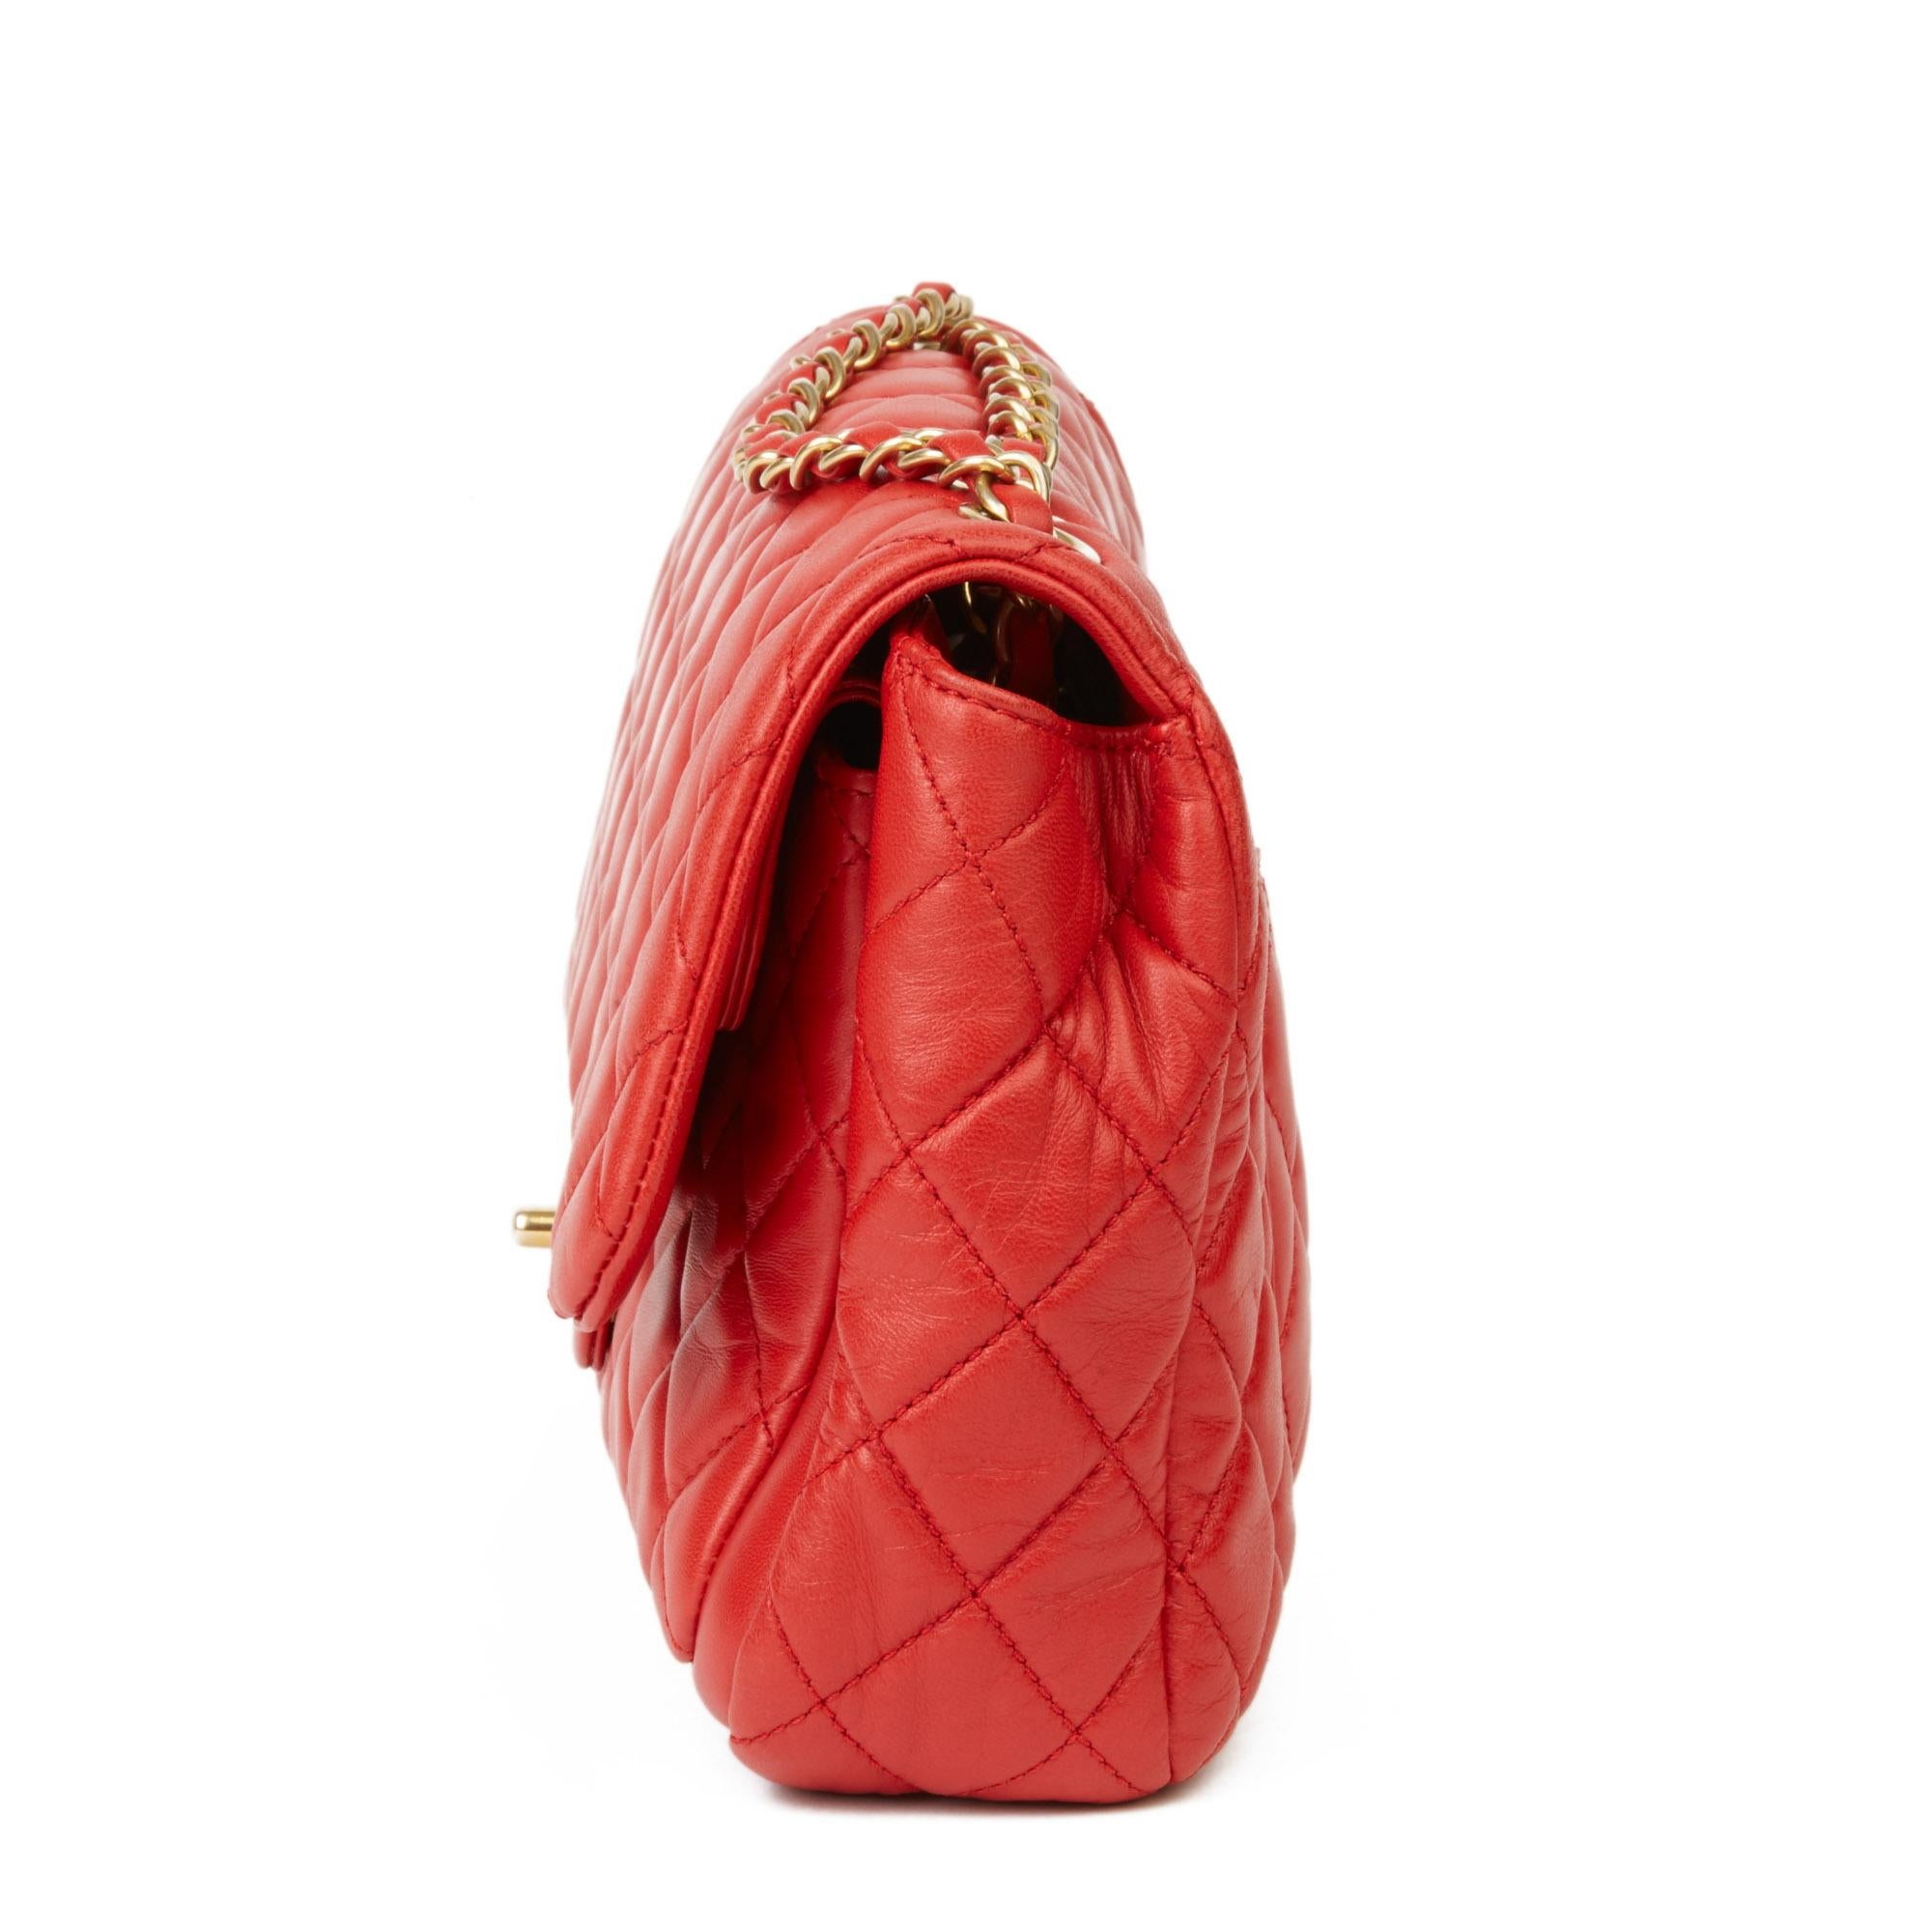 CHANEL
Lipstick Red Quilted Lambskin Classic Single Flap Bag

Xupes Reference: CB197
Serial Number: 18851821
Age (Circa): 2014
Accompanied By: Chanel Dust Bag, Box, Care Booklet, Authenticity Card, Protective Felt
Authenticity Details: Authenticity